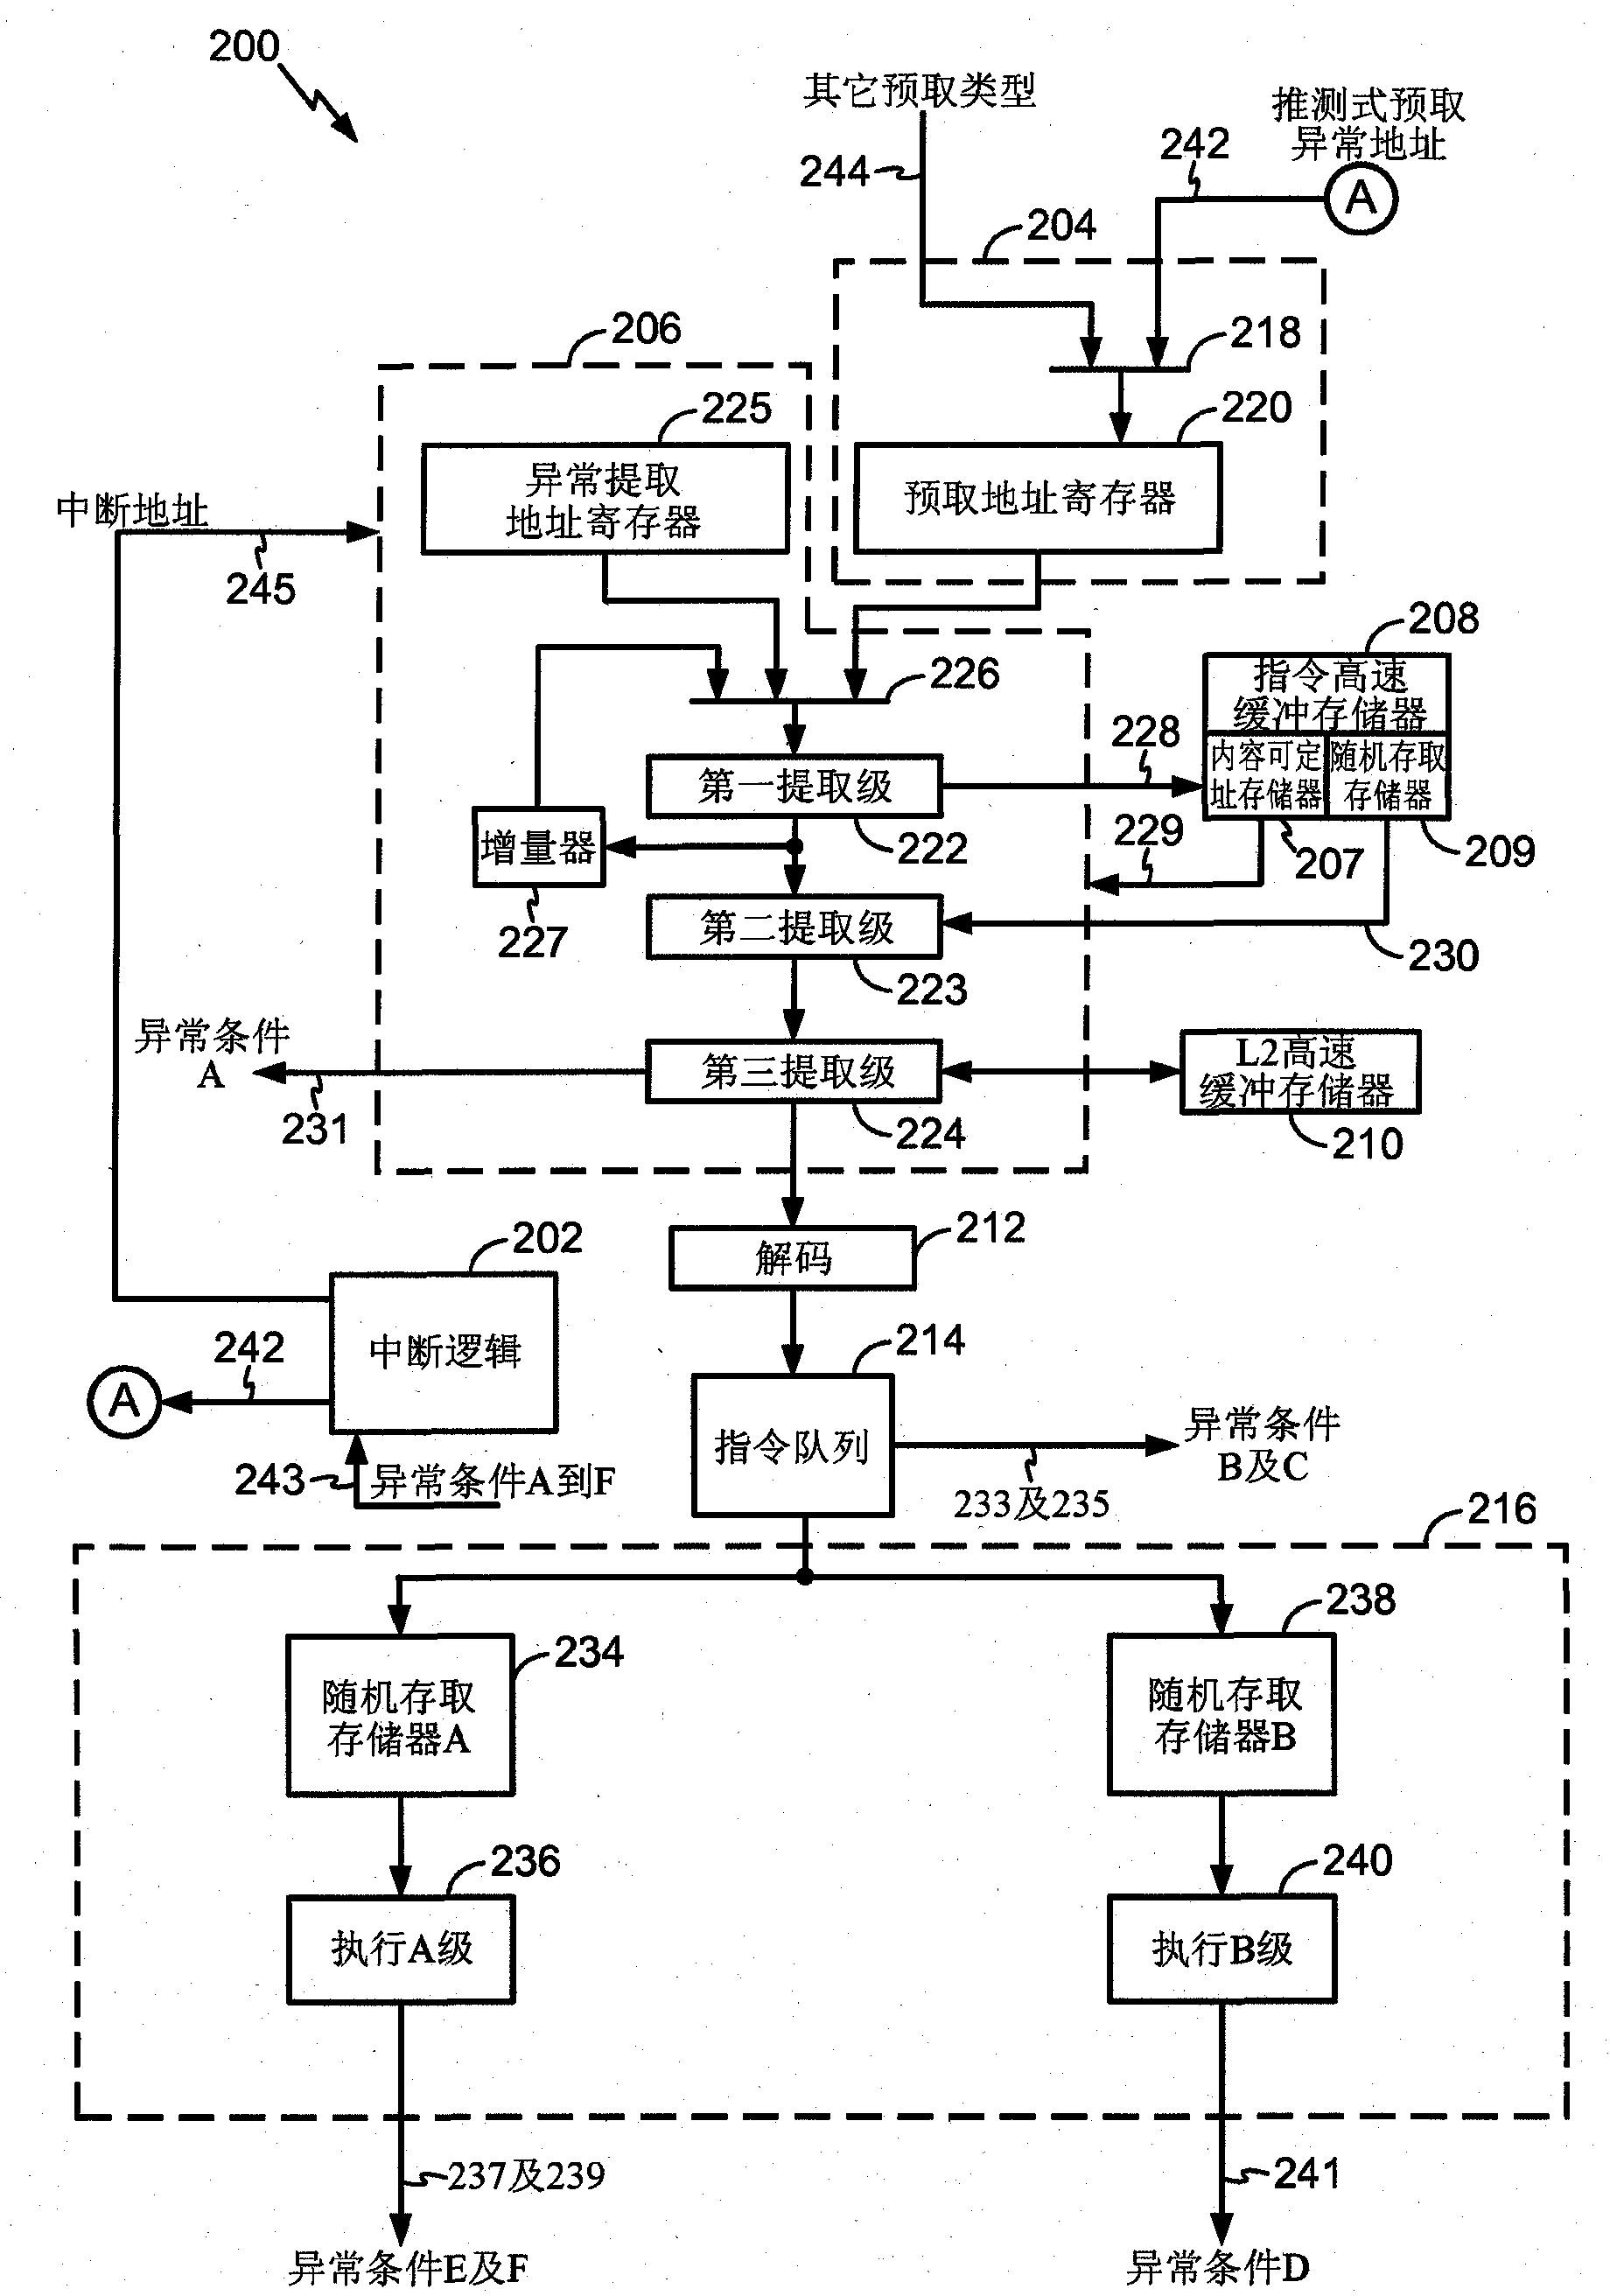 Apparatus and methods for speculative interrupt vector prefetching